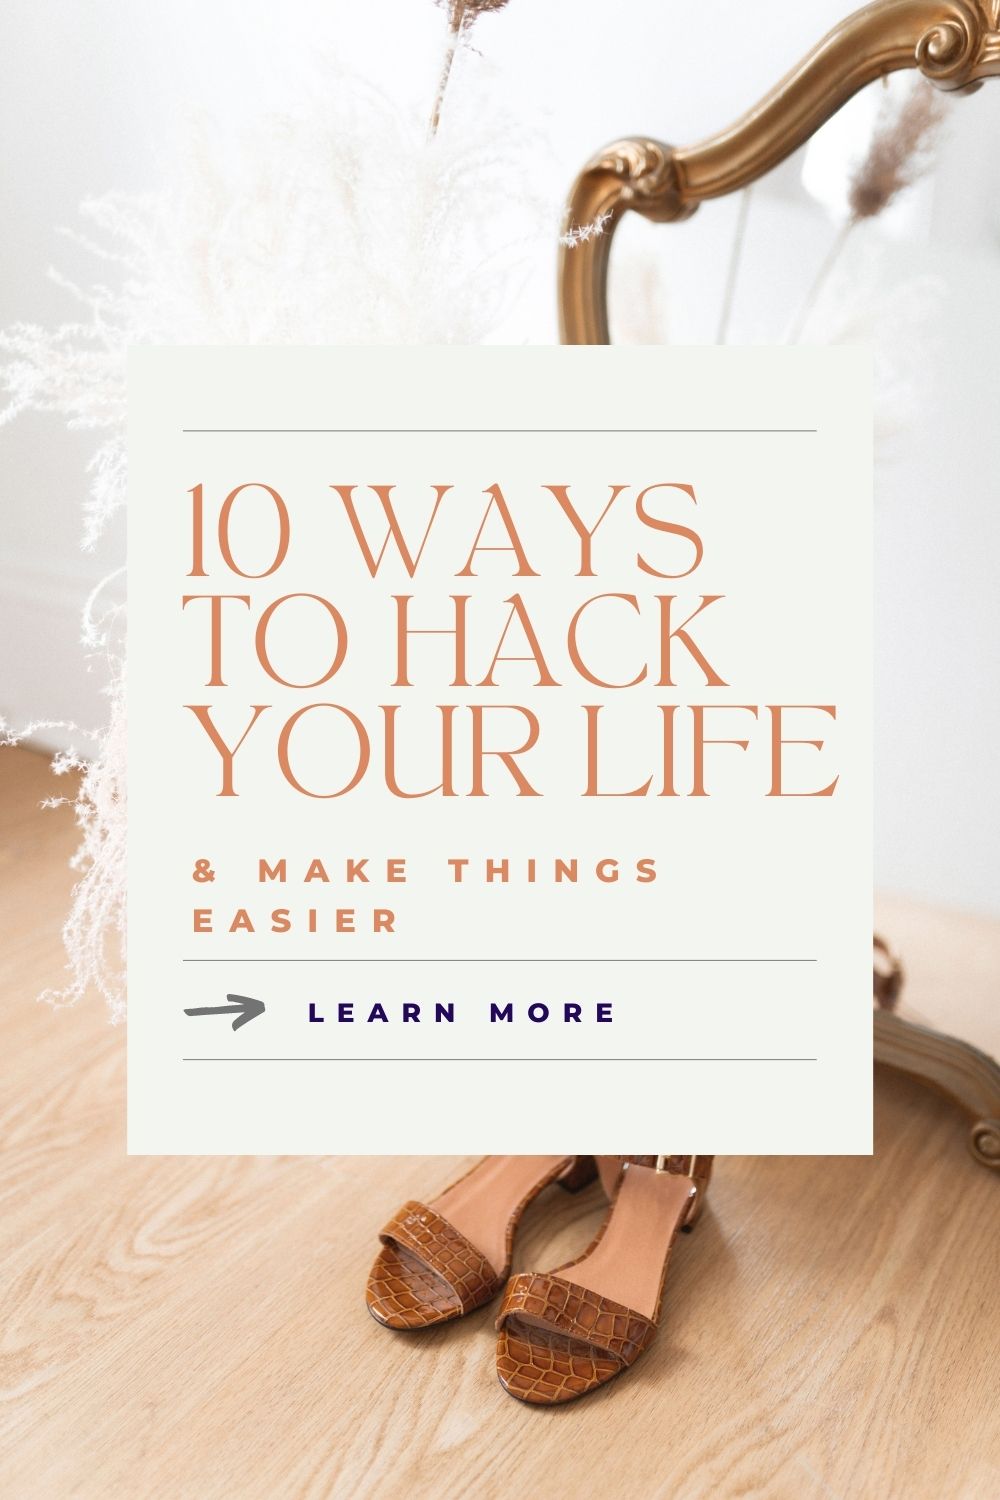 10 Ways to Hack Your Life and Make Things Easier